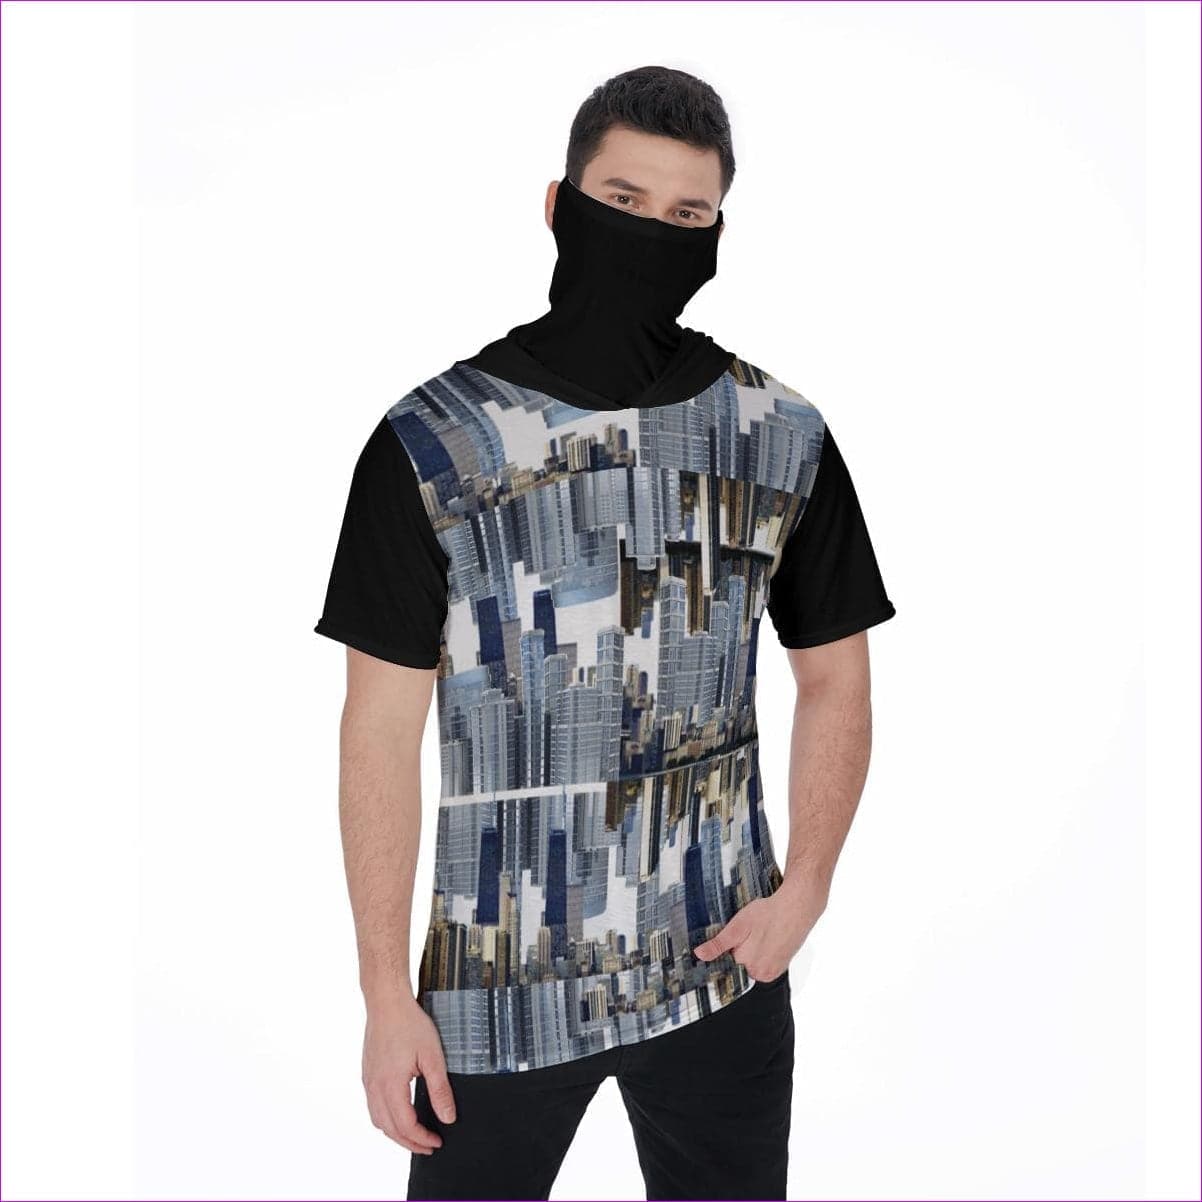 Black City Blocks Men's T-Shirt With Mask - men's t-shirt with face mask at TFC&H Co.